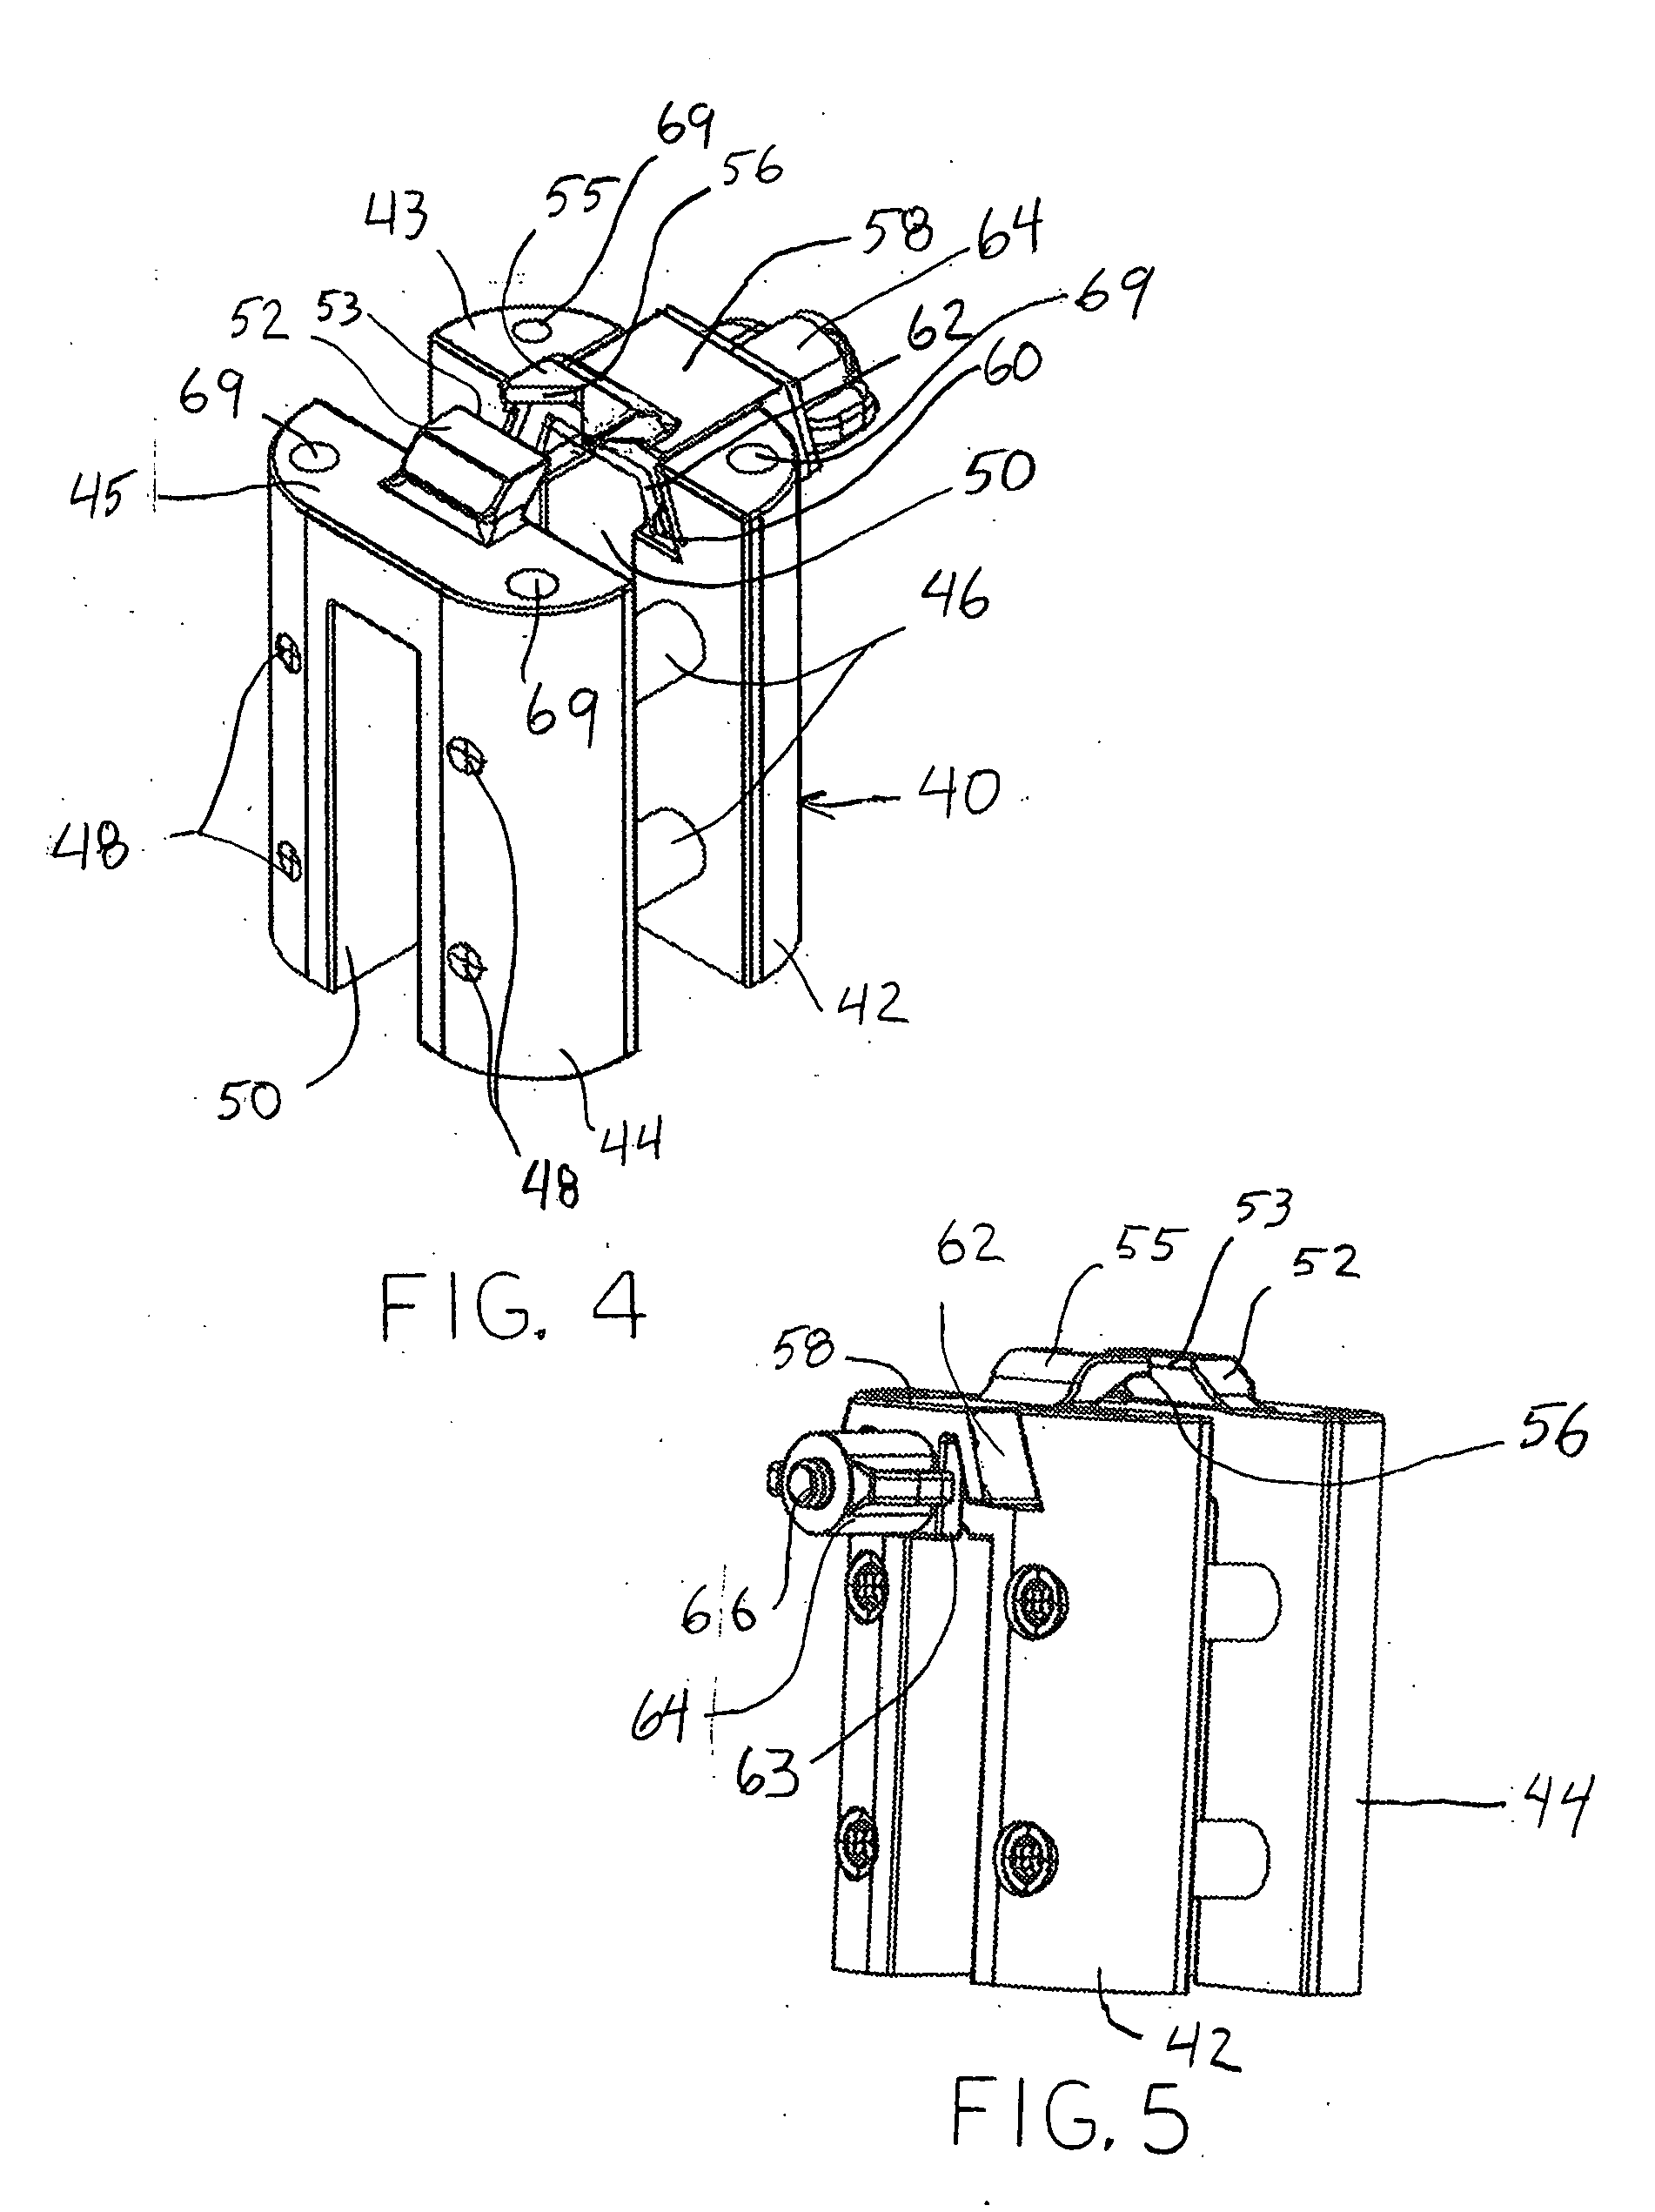 Instrumentation for recording and replicating orthopaedic implant orientation